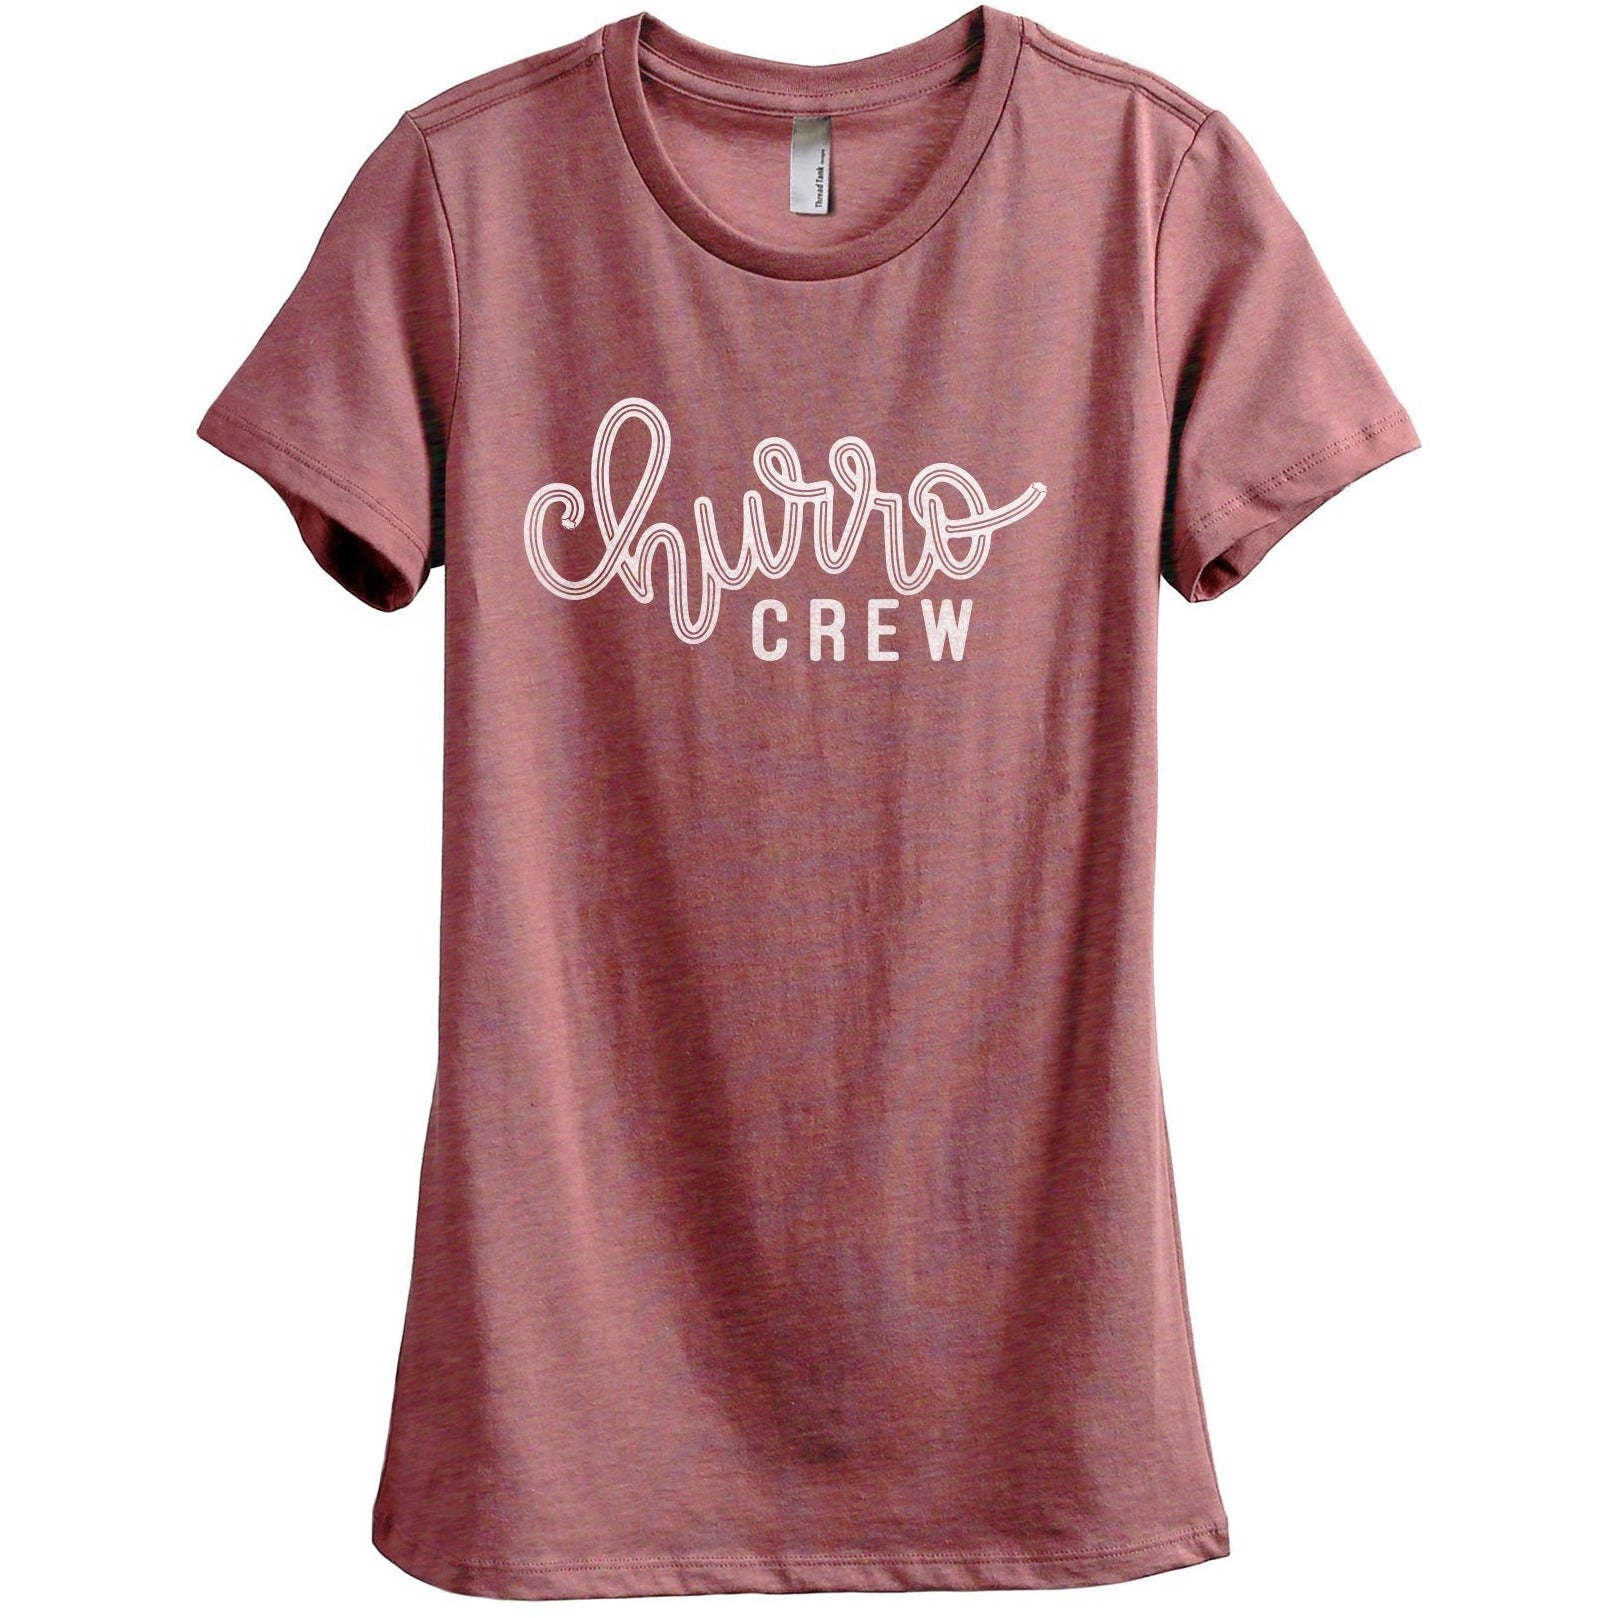 Churro Crew Women's Relaxed Crewneck T-Shirt Top Tee Heather Rouge